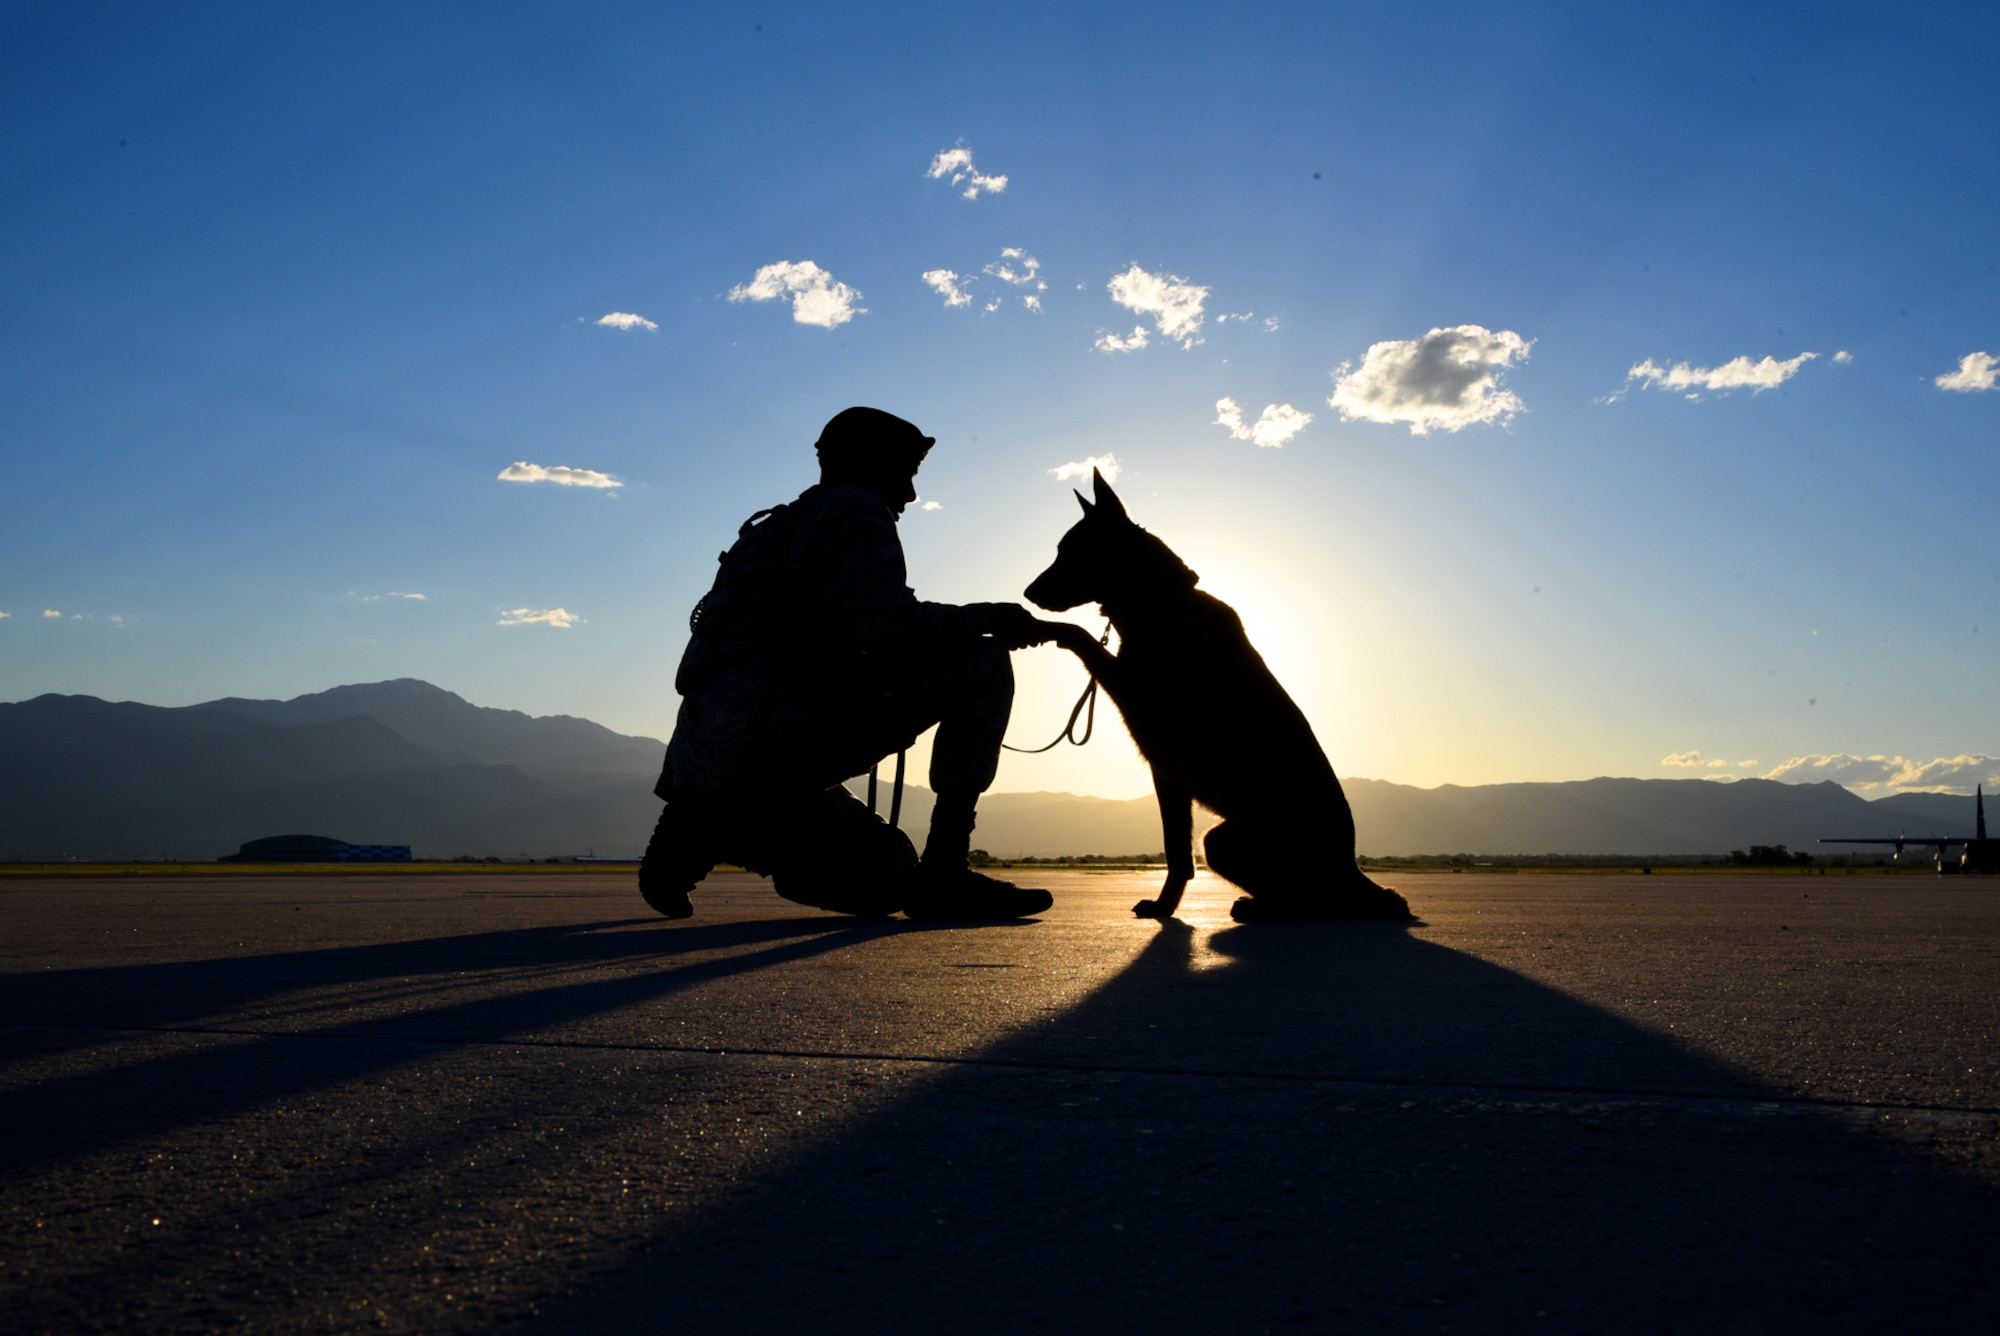 Senior Airman Tariq Russell, 21st Security Forces Squadron military working dog handler, shakes hands with his partner, Ppaul, at Peterson Air Force Base, Colo., June 14, 2016. Military working dog handlers are assigned one dog for their entire duration at Peterson AFB. (U.S. Air Force photo by Airman 1st Class Dennis Hoffman)